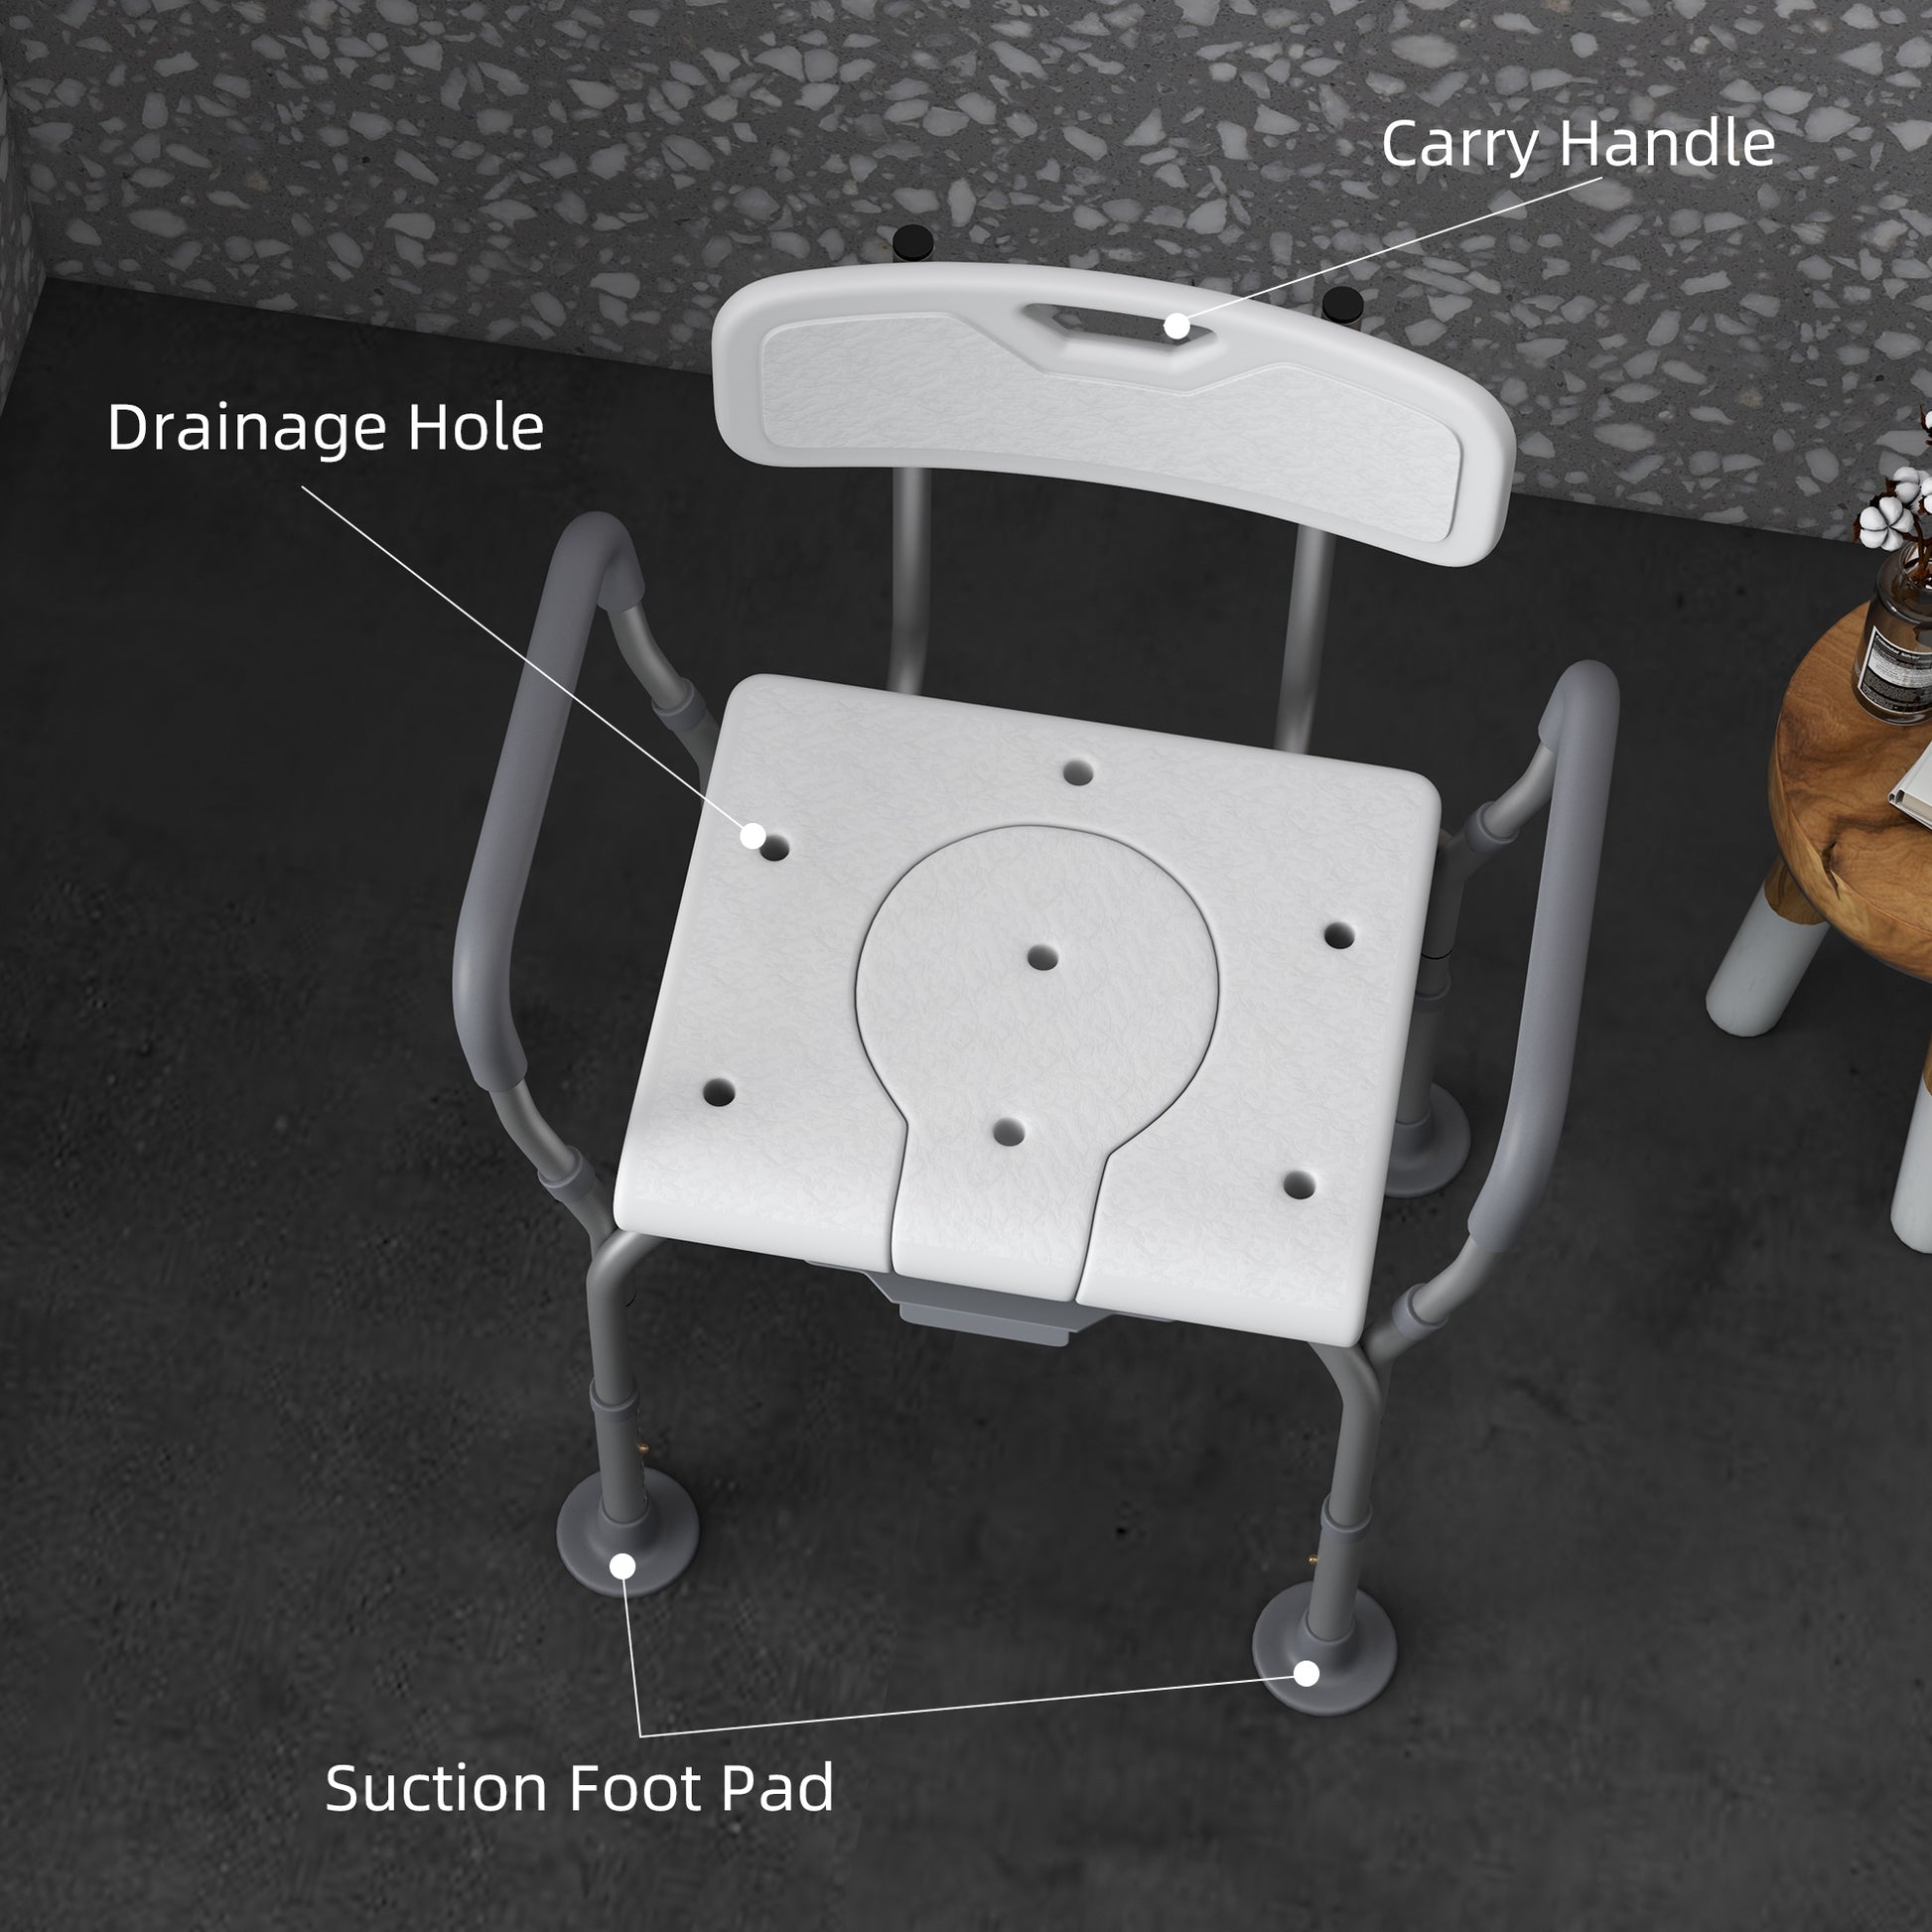 3-in-1 Shower Chair with Back, Adjustable Bedside Commode, Raised Toilet Seat w/ Rubber Foot Pad for Seniors, Disabled Bath Chairs   at Gallery Canada